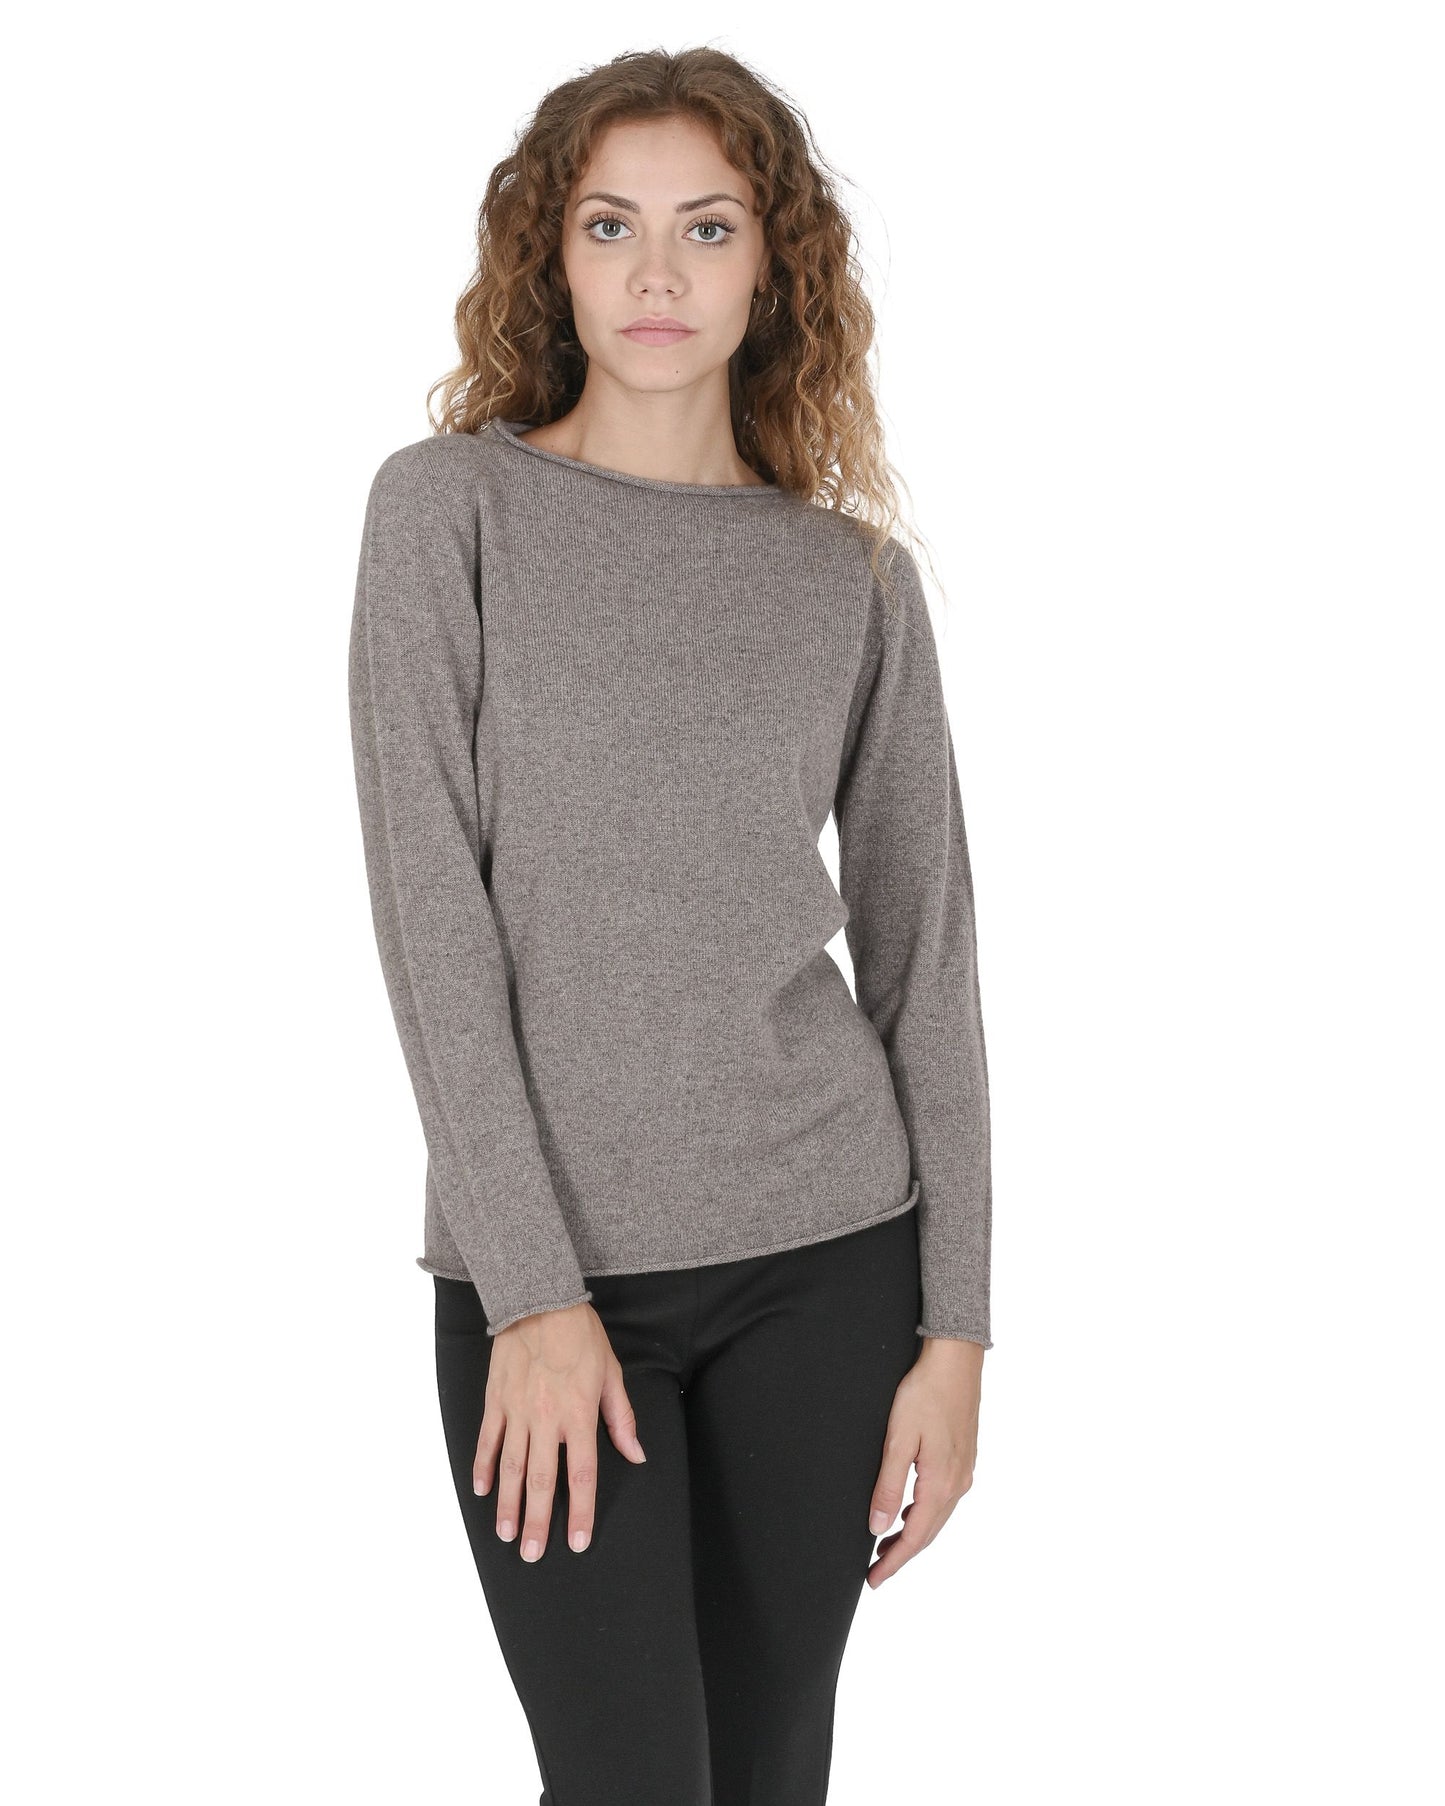 Crown of Edinburgh Cashmere Womens Boat Neck Sweater COE 0025 TAUPE